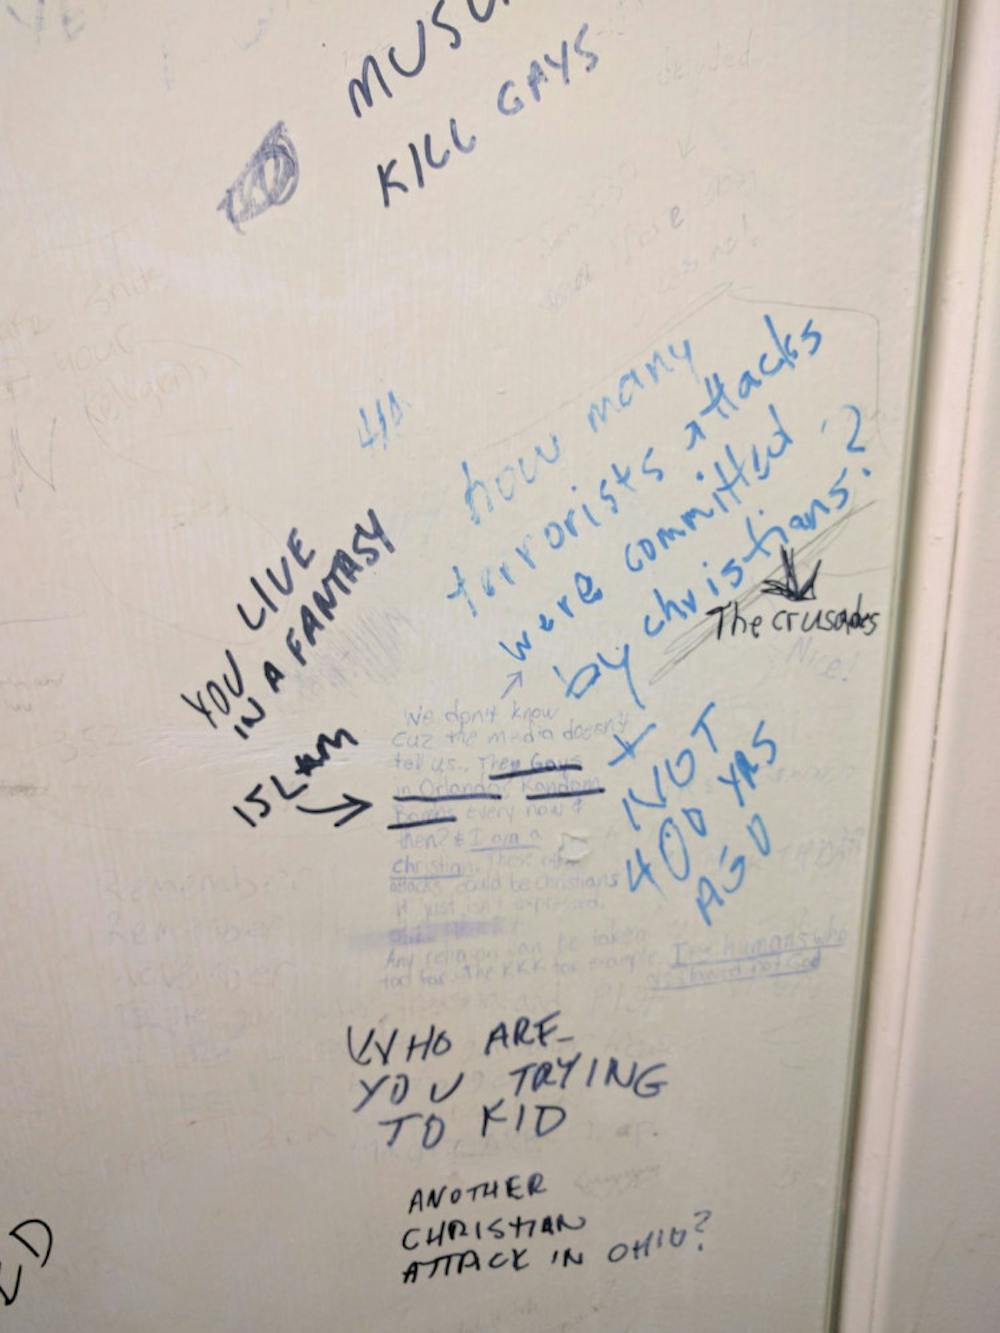 <p>Anti-Muslim graffiti was found in a bathroom stall in McCarty Hall B on Thursday. Among the writings were statements like, 'Muslims kill gays.' The graffiti has since been taken down.</p>